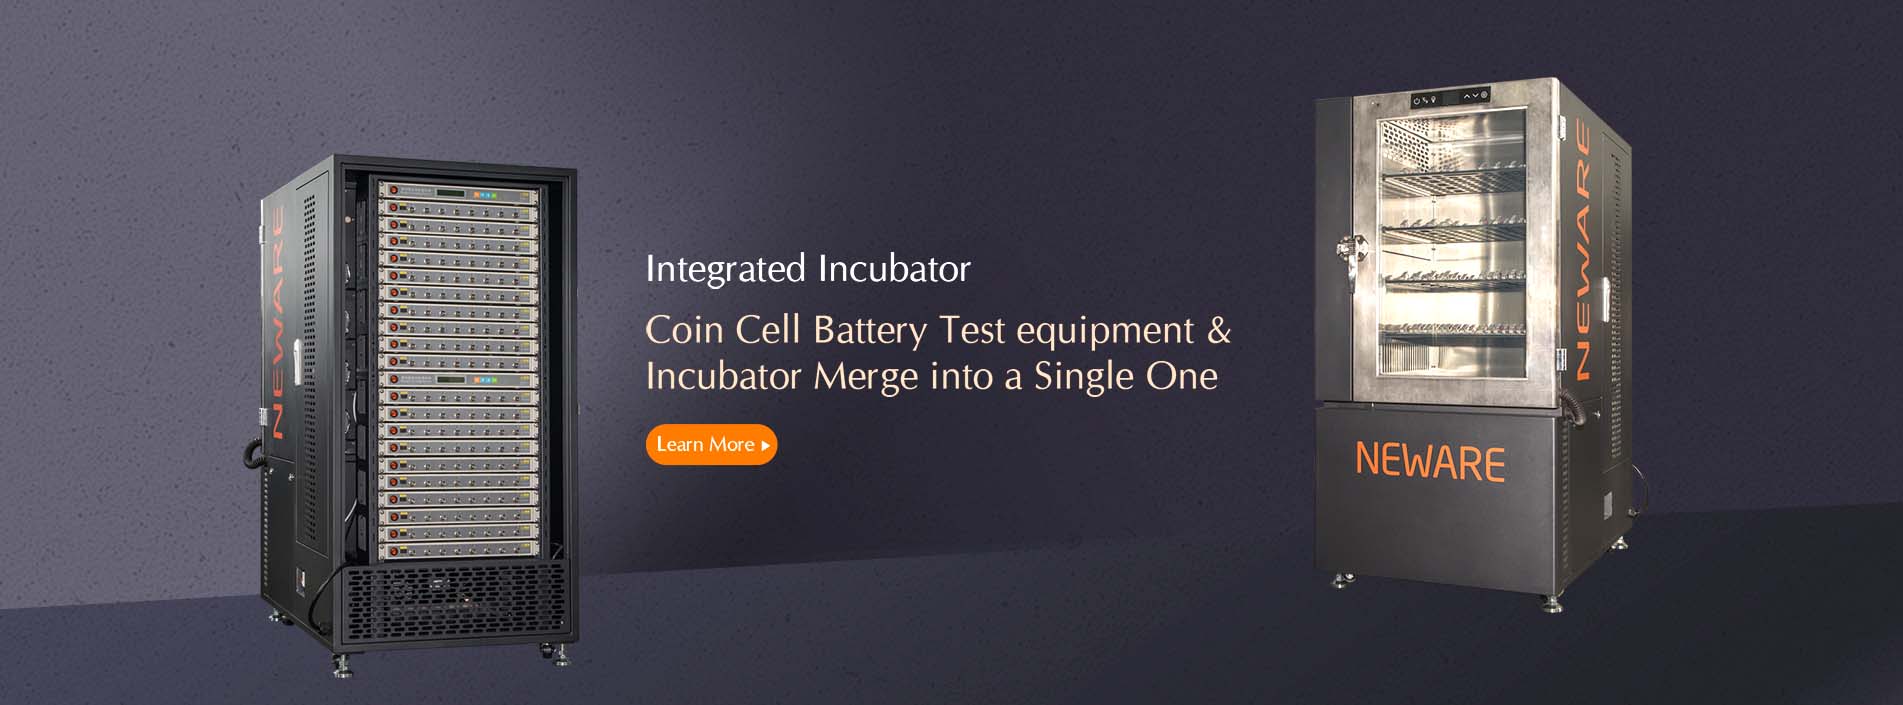 3C Digital Cell Battery Testing System